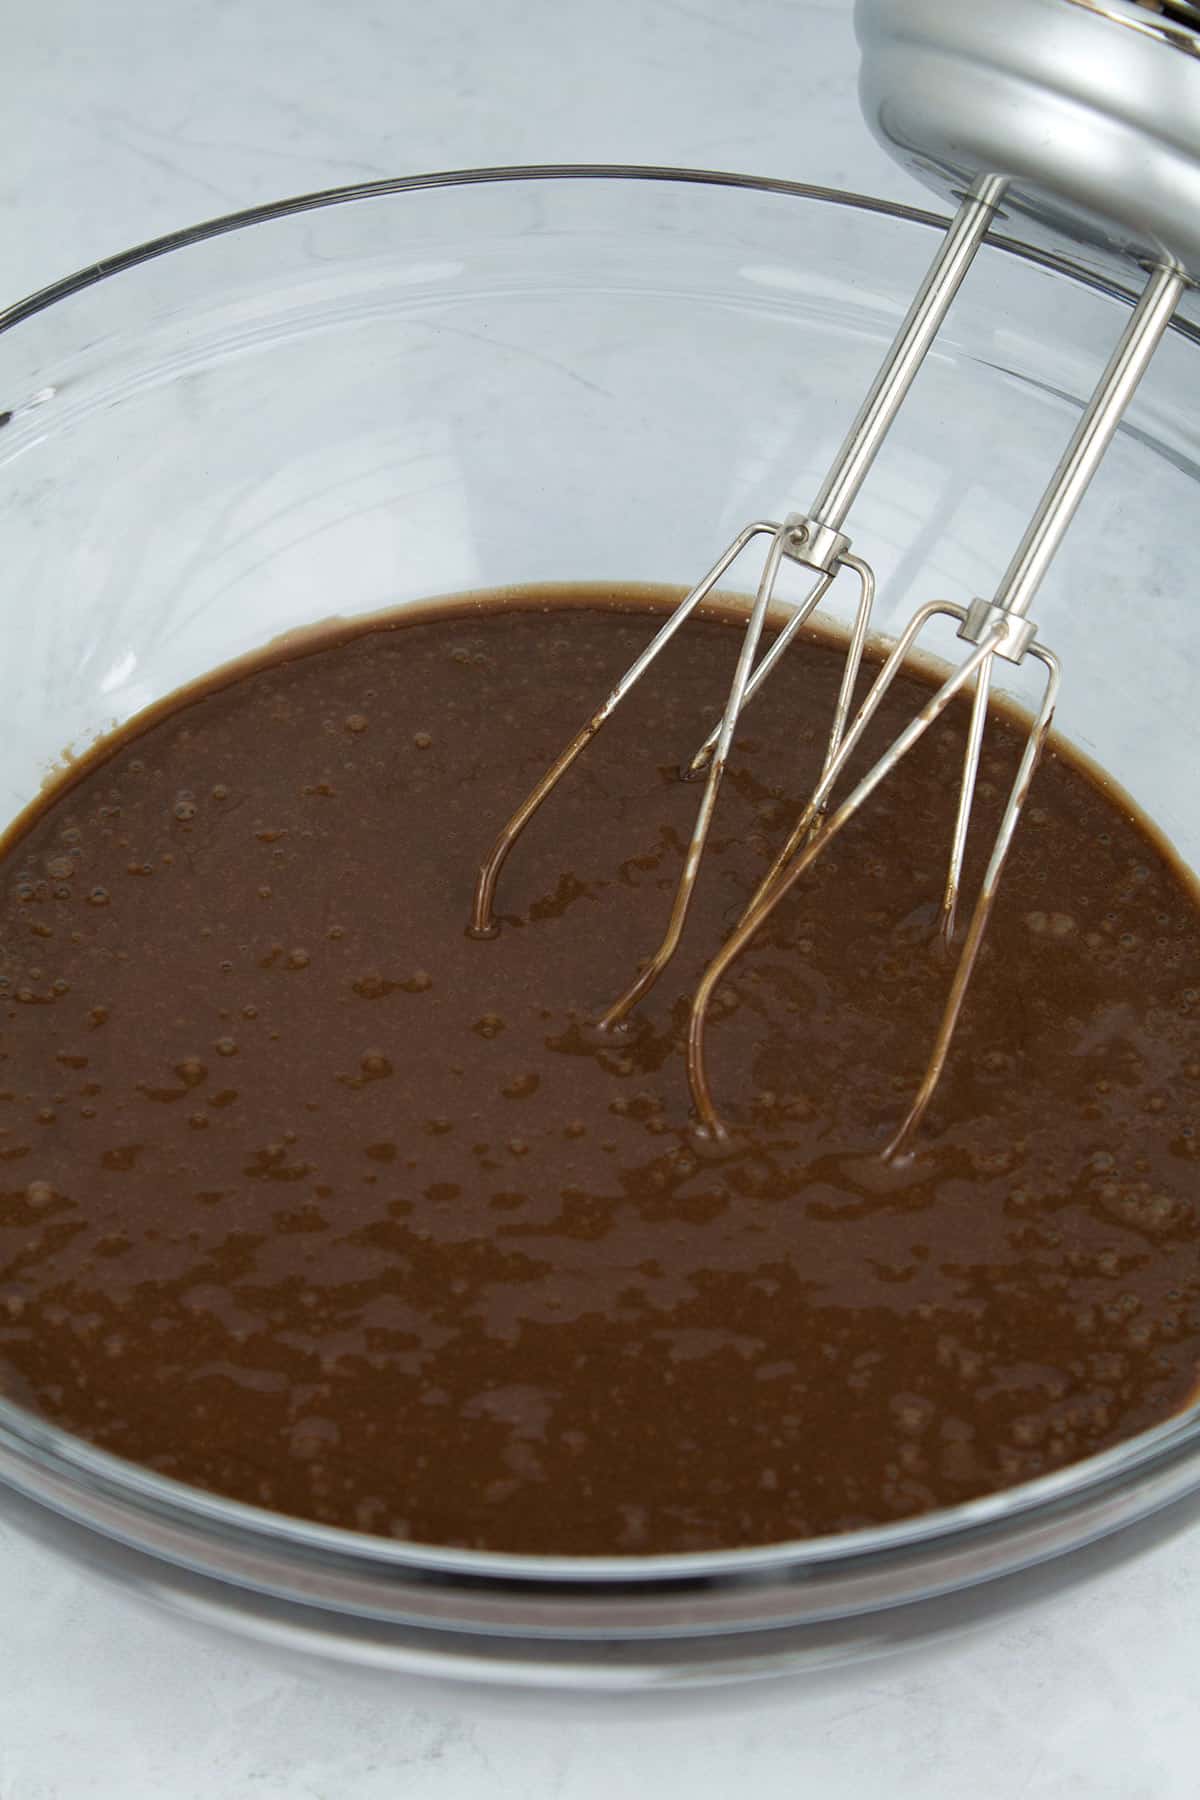 Finished chocolate cake batter in a clear glass bowl with hand mixers resting in the back.